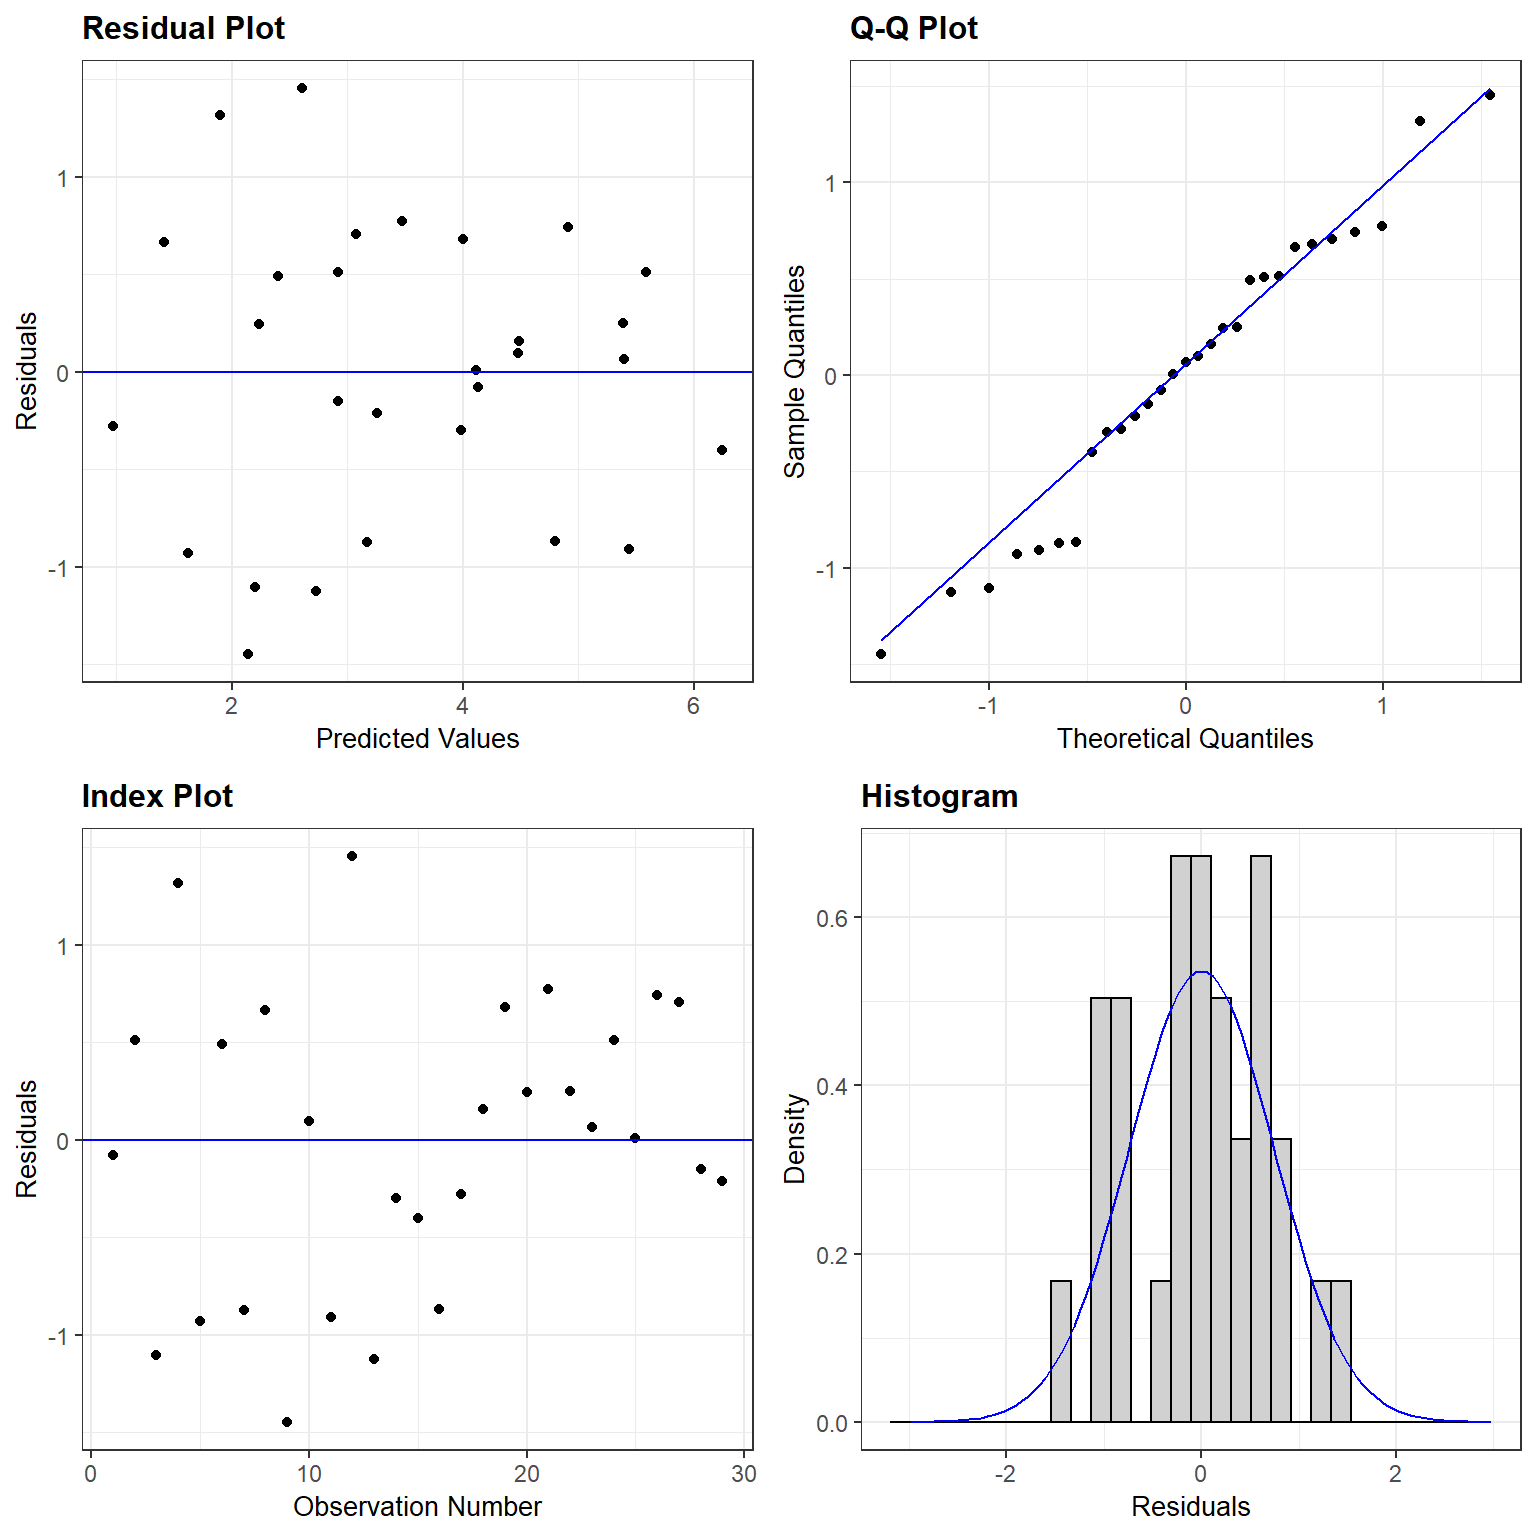 Residual plot for a linear model relating log plant species richness to log species area for 29 islands in the Galapagos Islands archipelago. Data are from (Johnson & Raven, 1973).